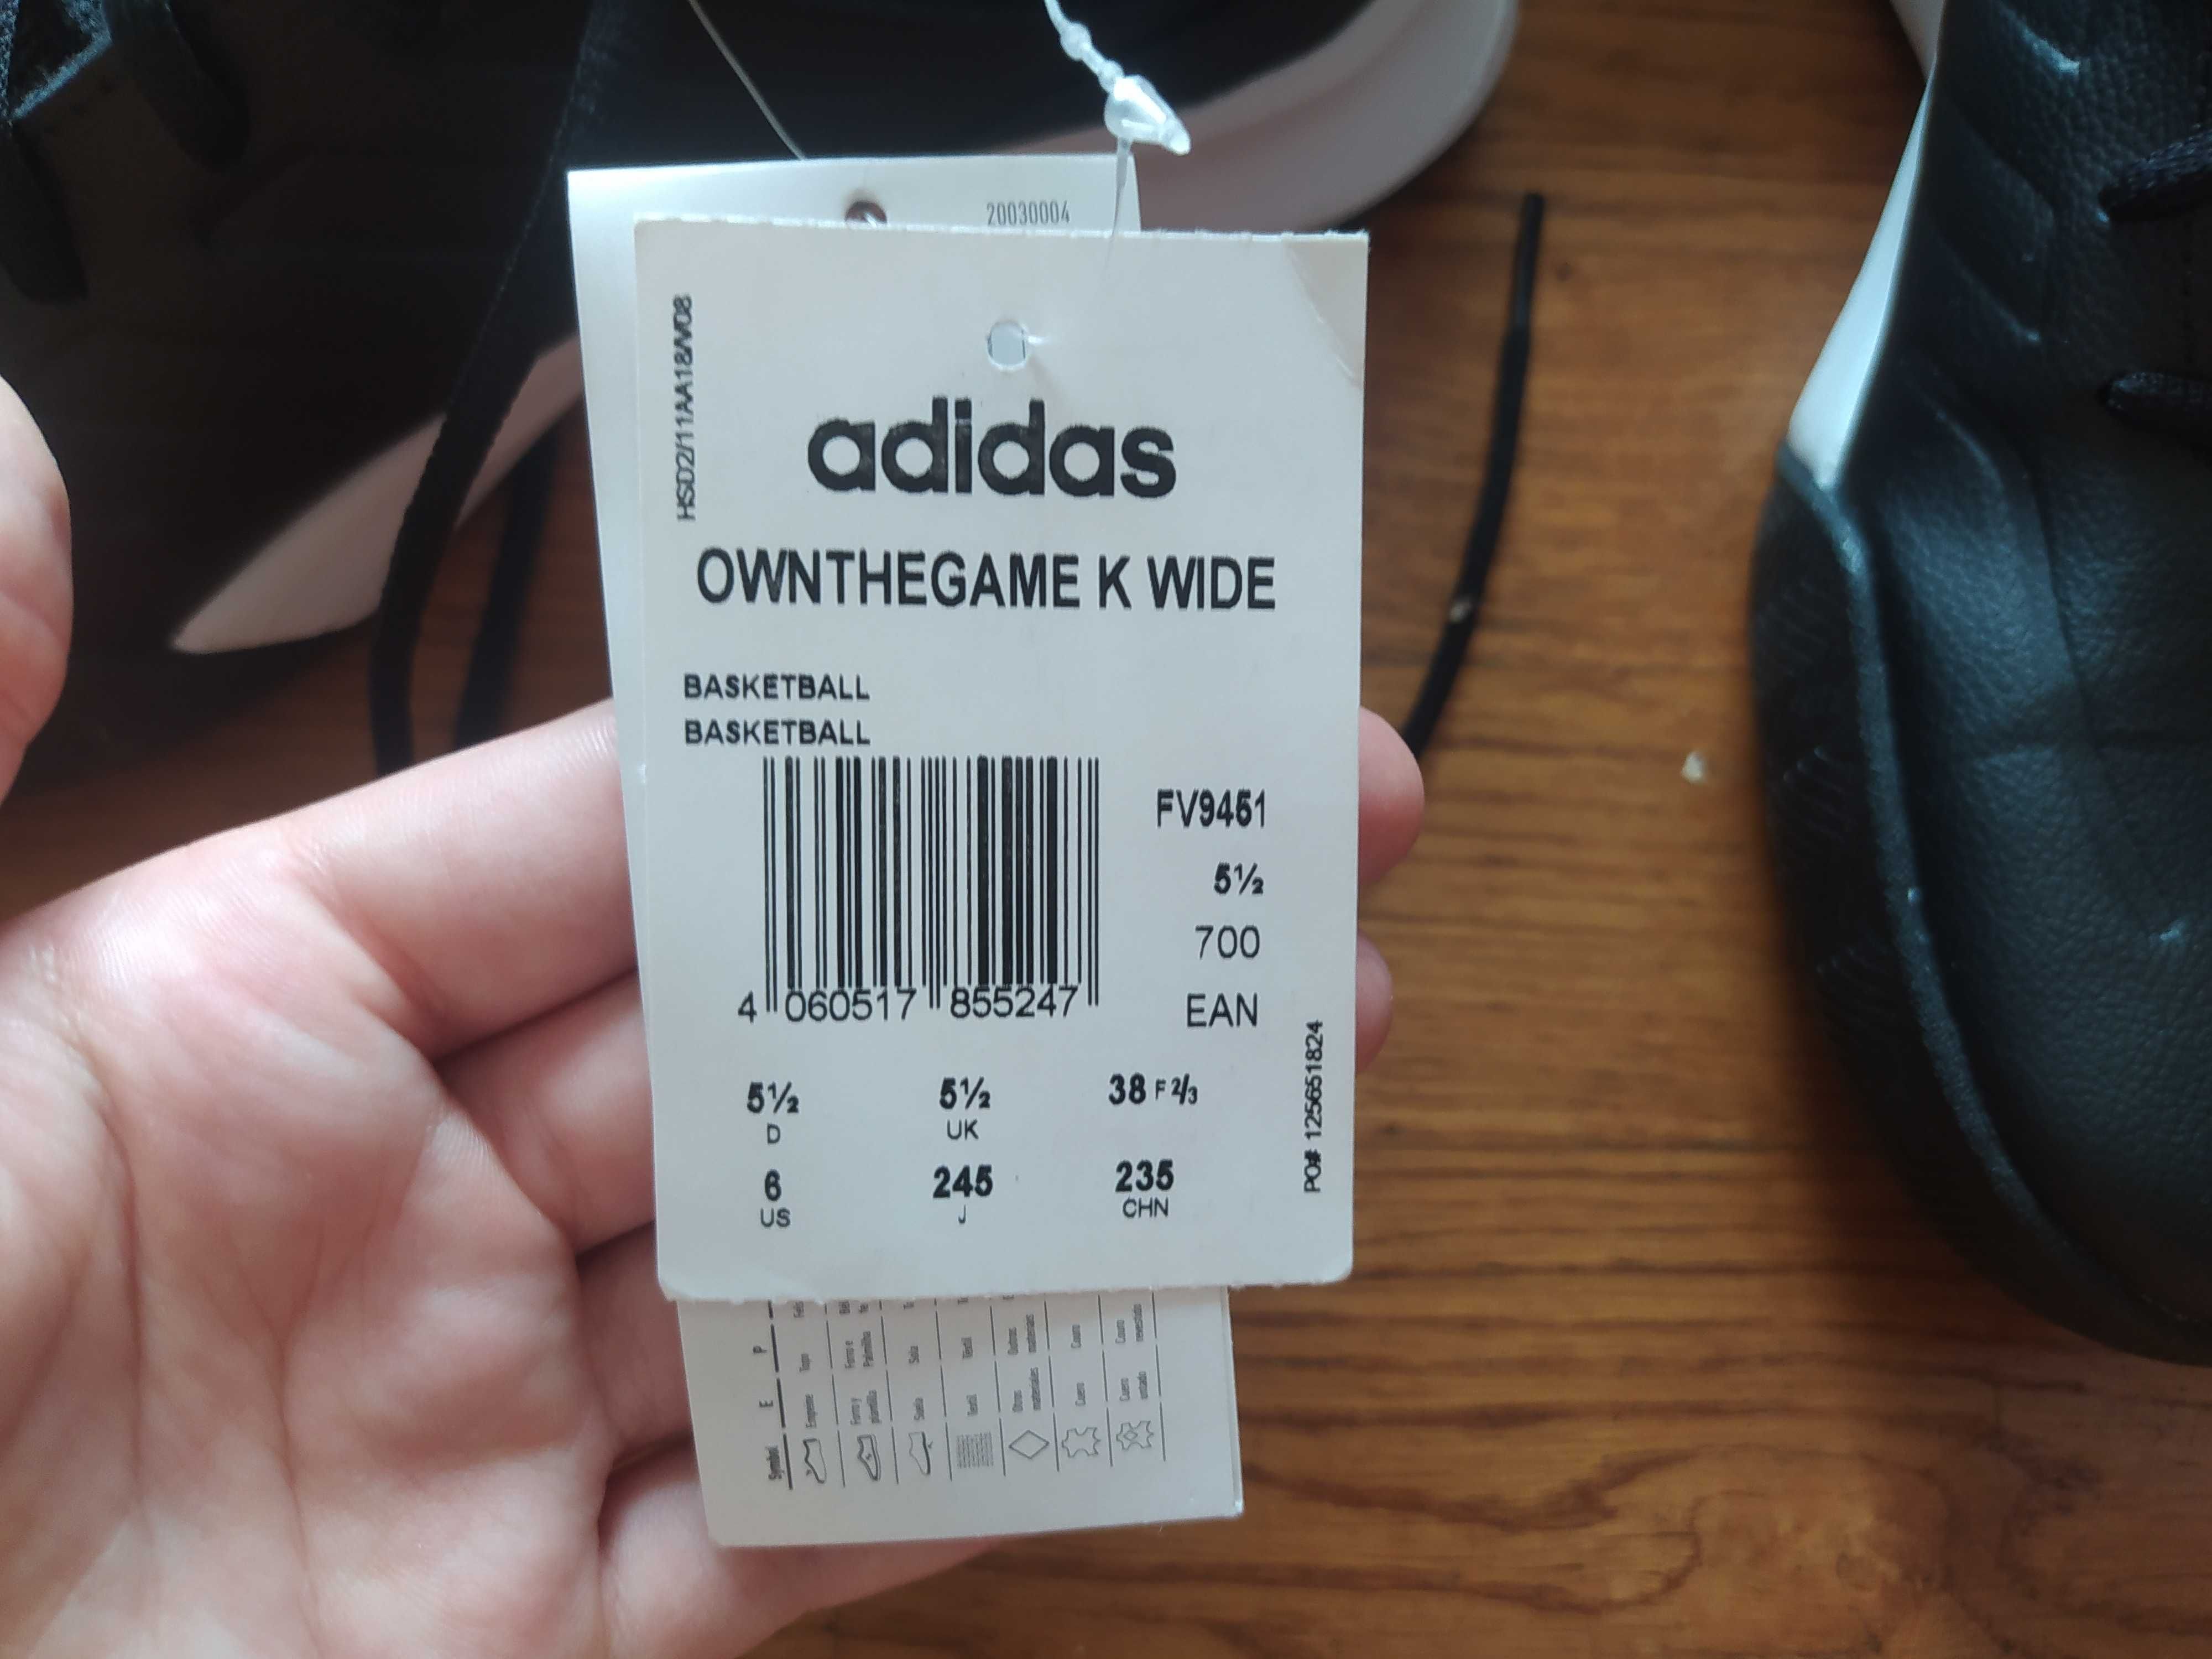 ownthegame K wide adidas buty